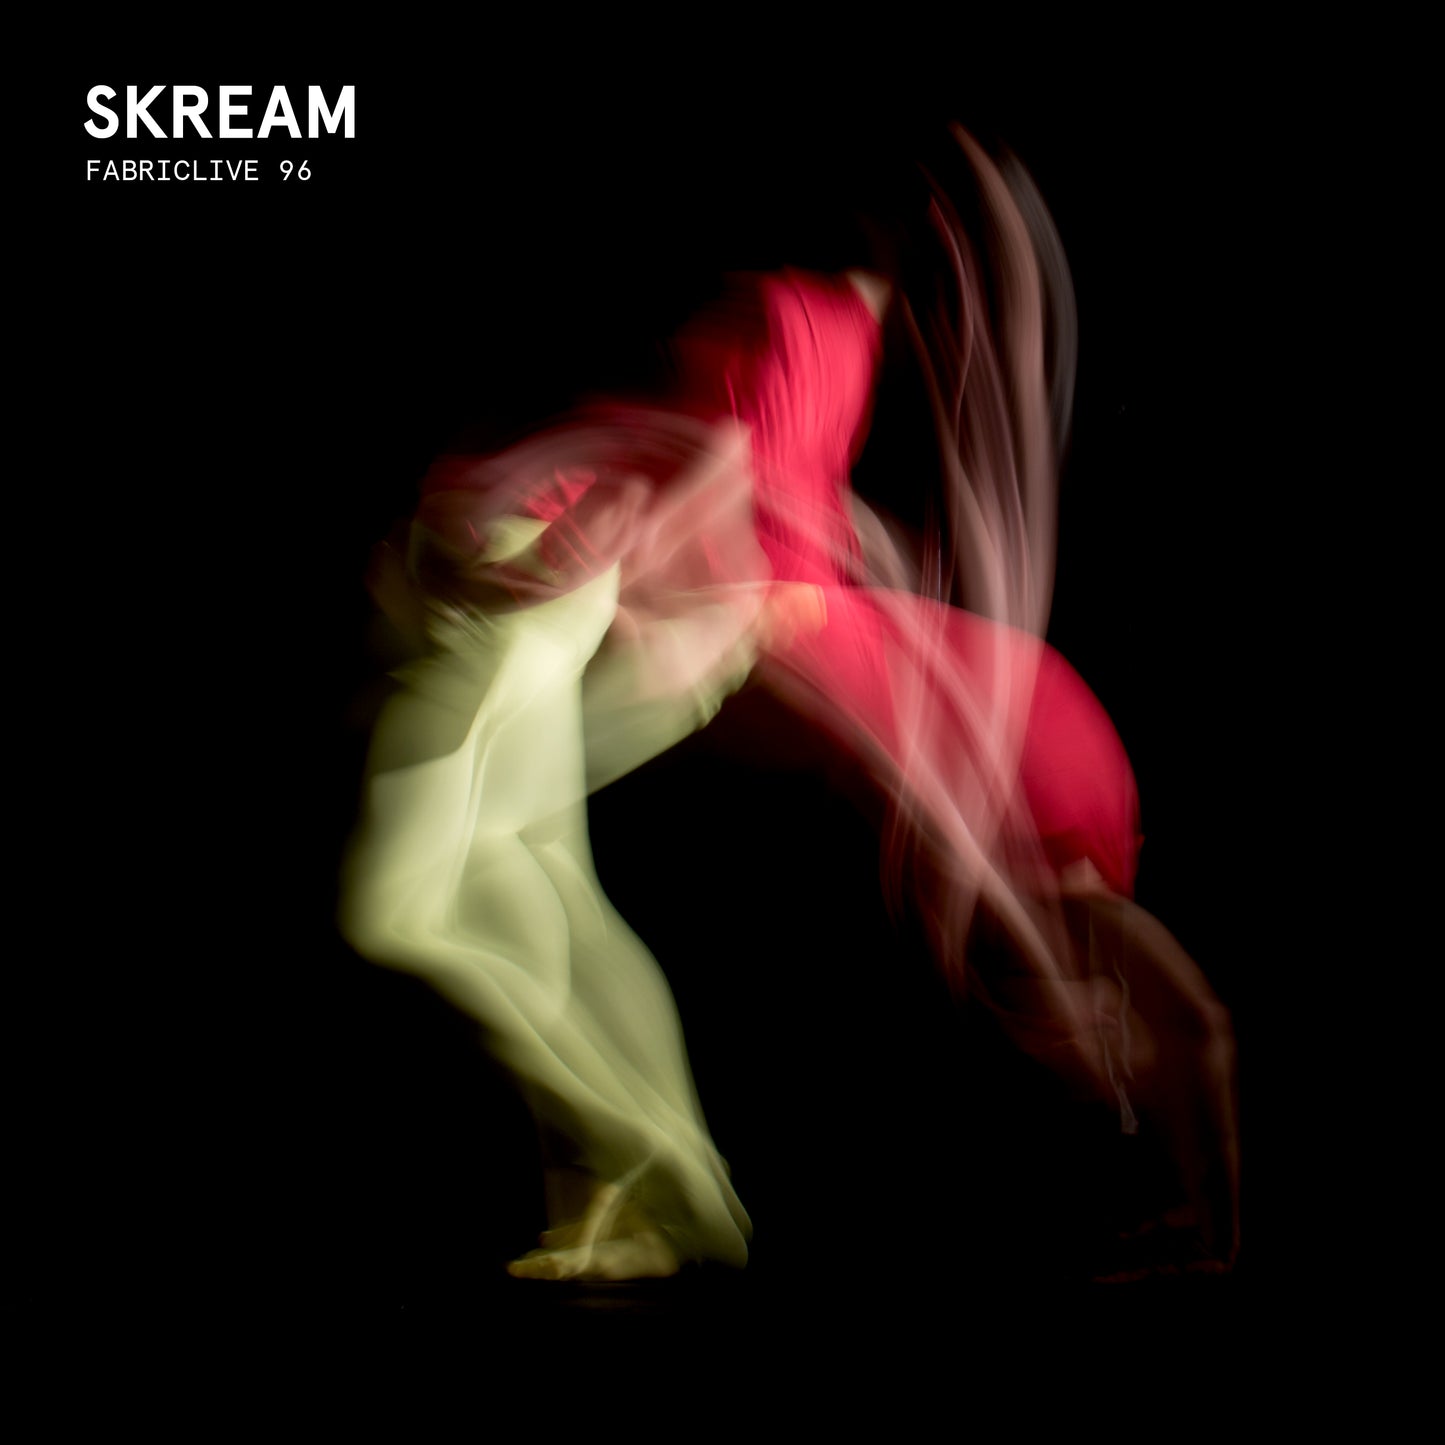 Skream - FABRICLIVE 96